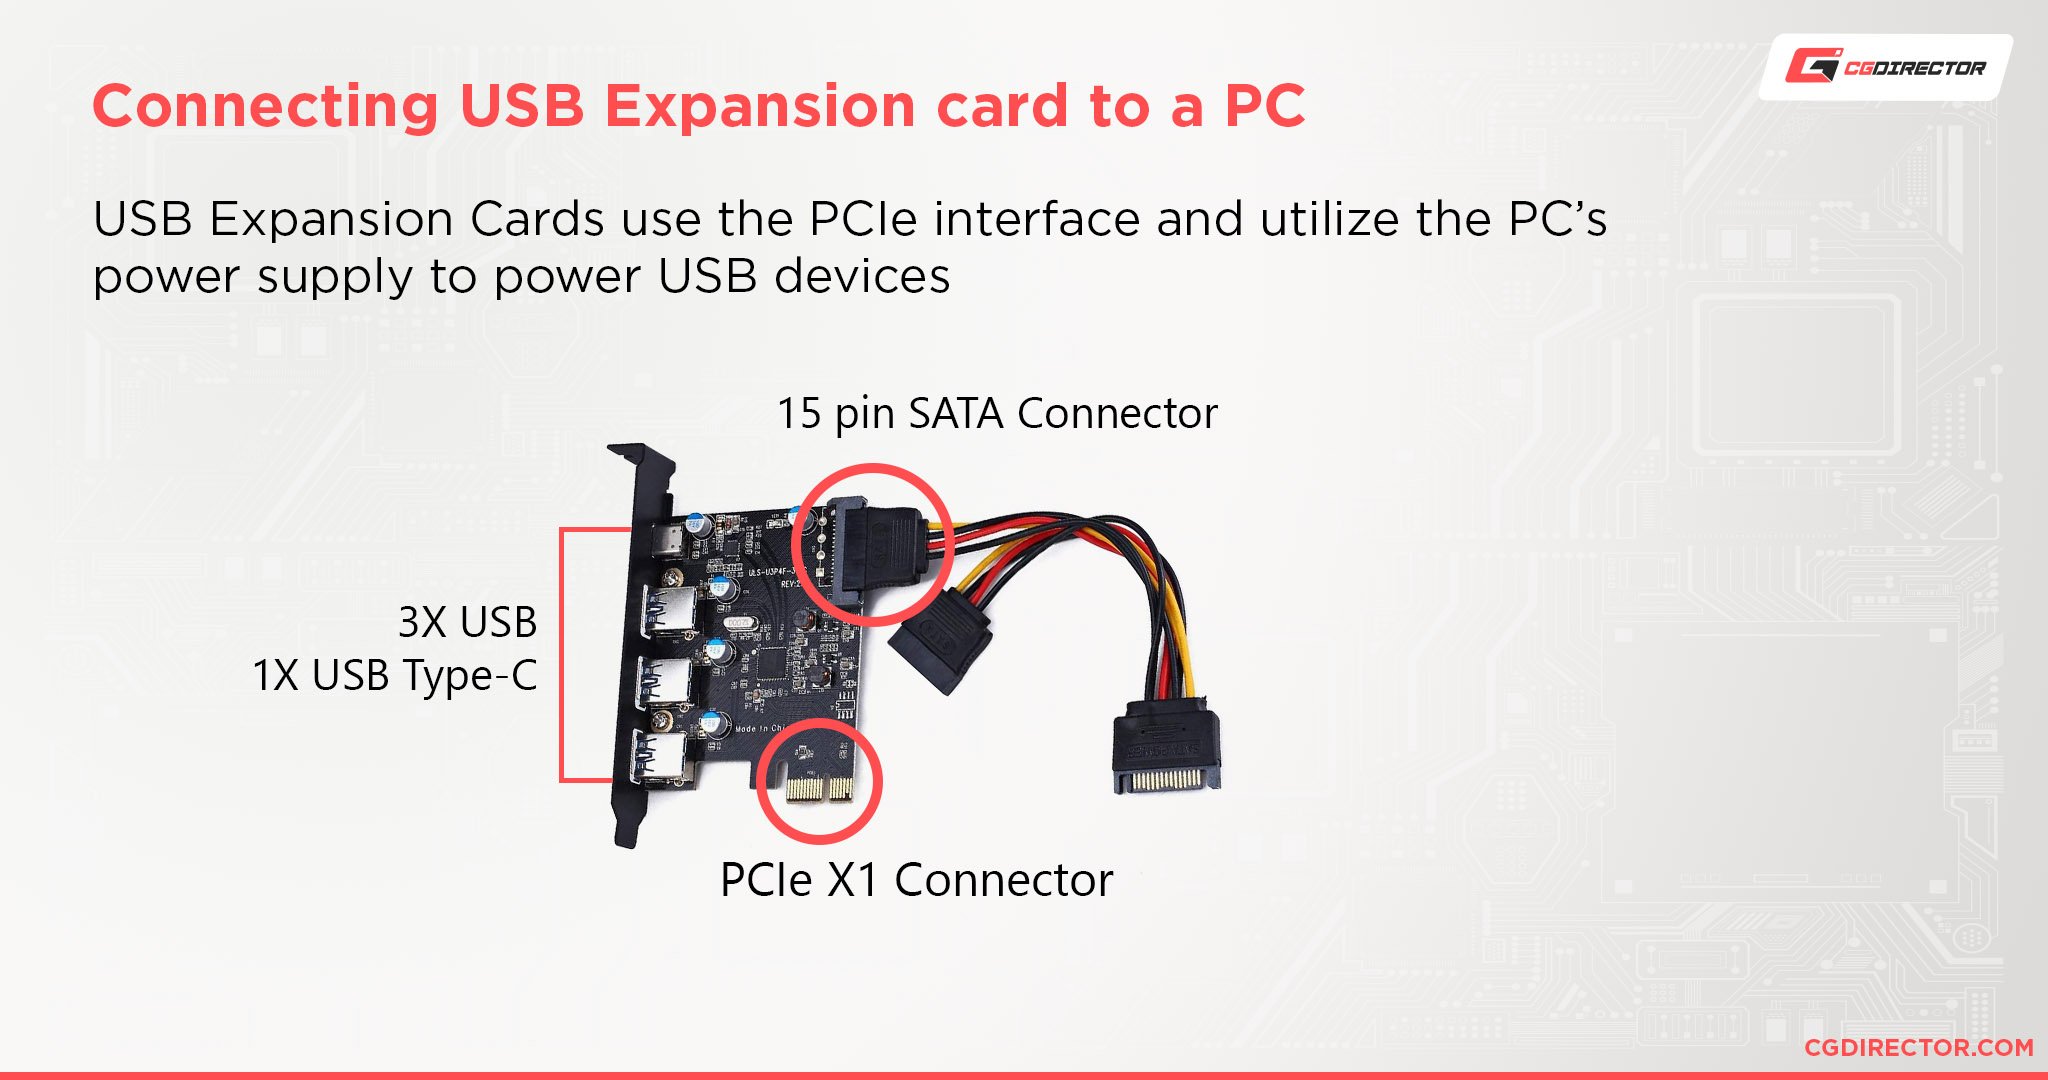 Connecting USP Expansion card to a PC